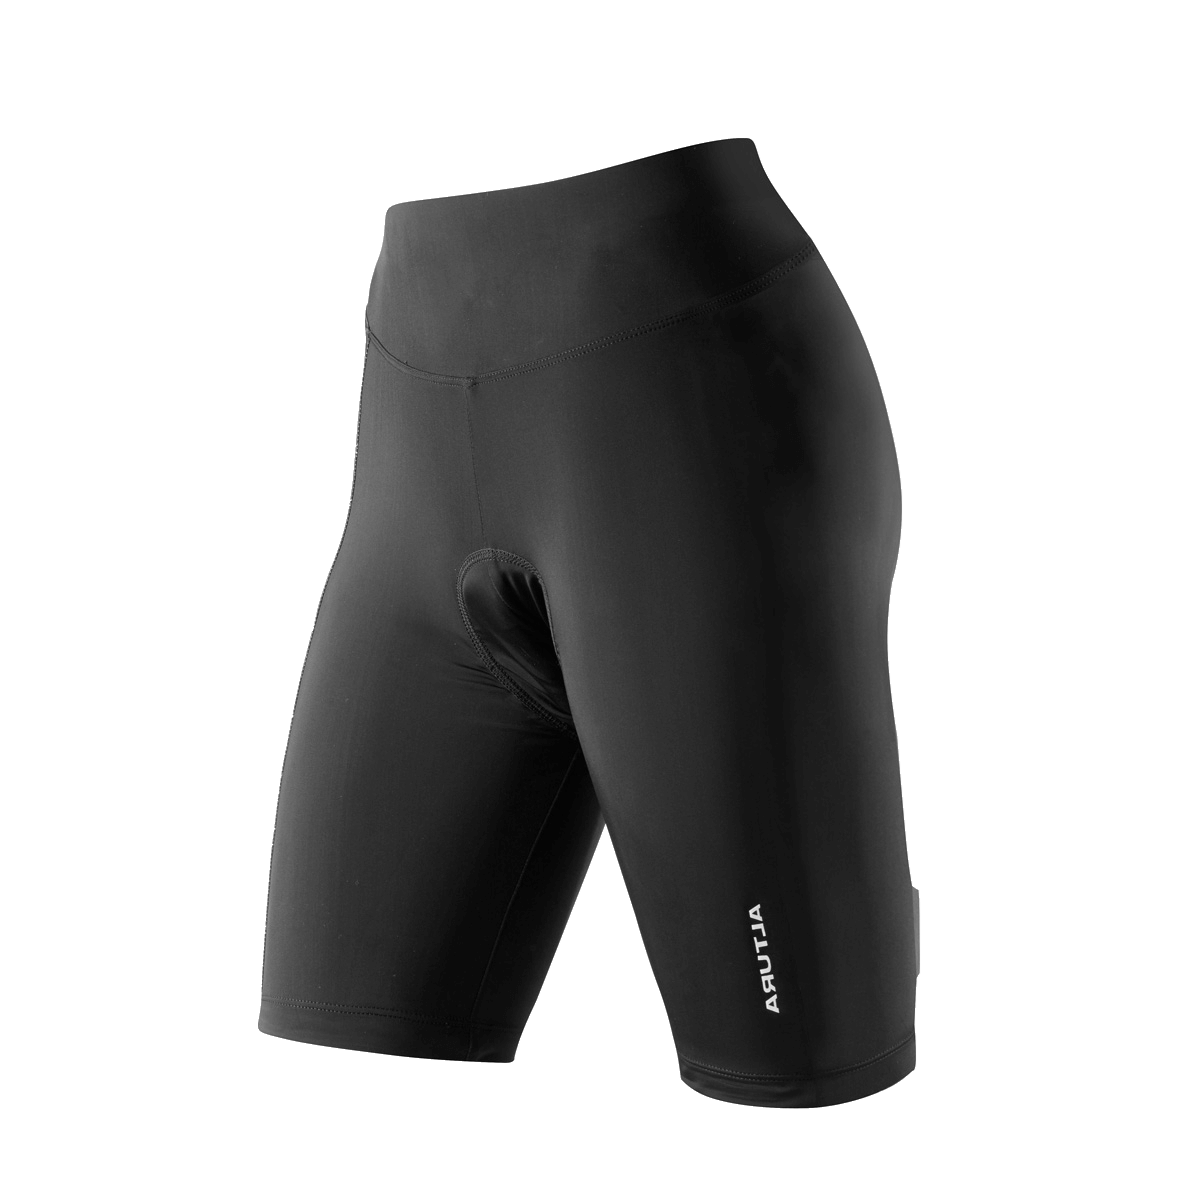 Cycle Tribe Product Sizes Black / Size 8 Altura Womens Airstream Waist Shorts